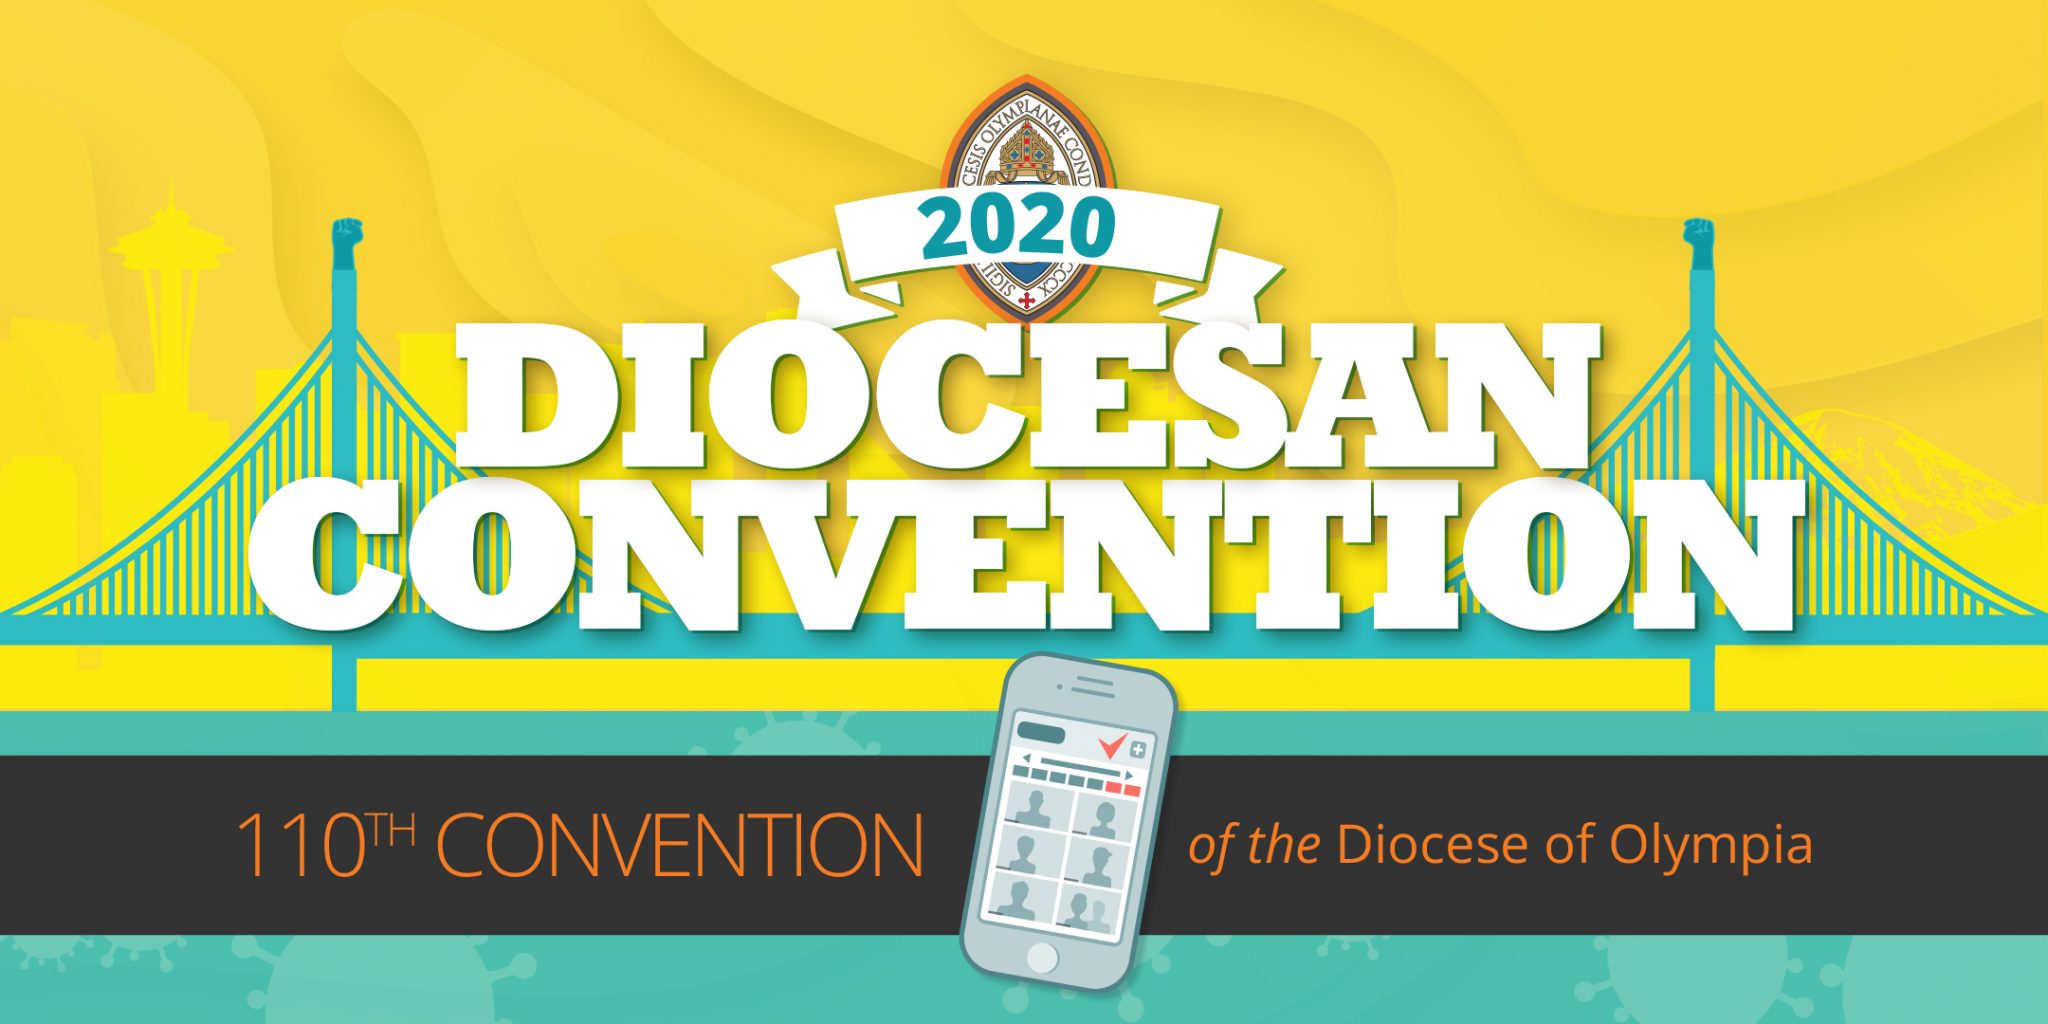 Diocesan Convention The Episcopal Diocese of Olympia